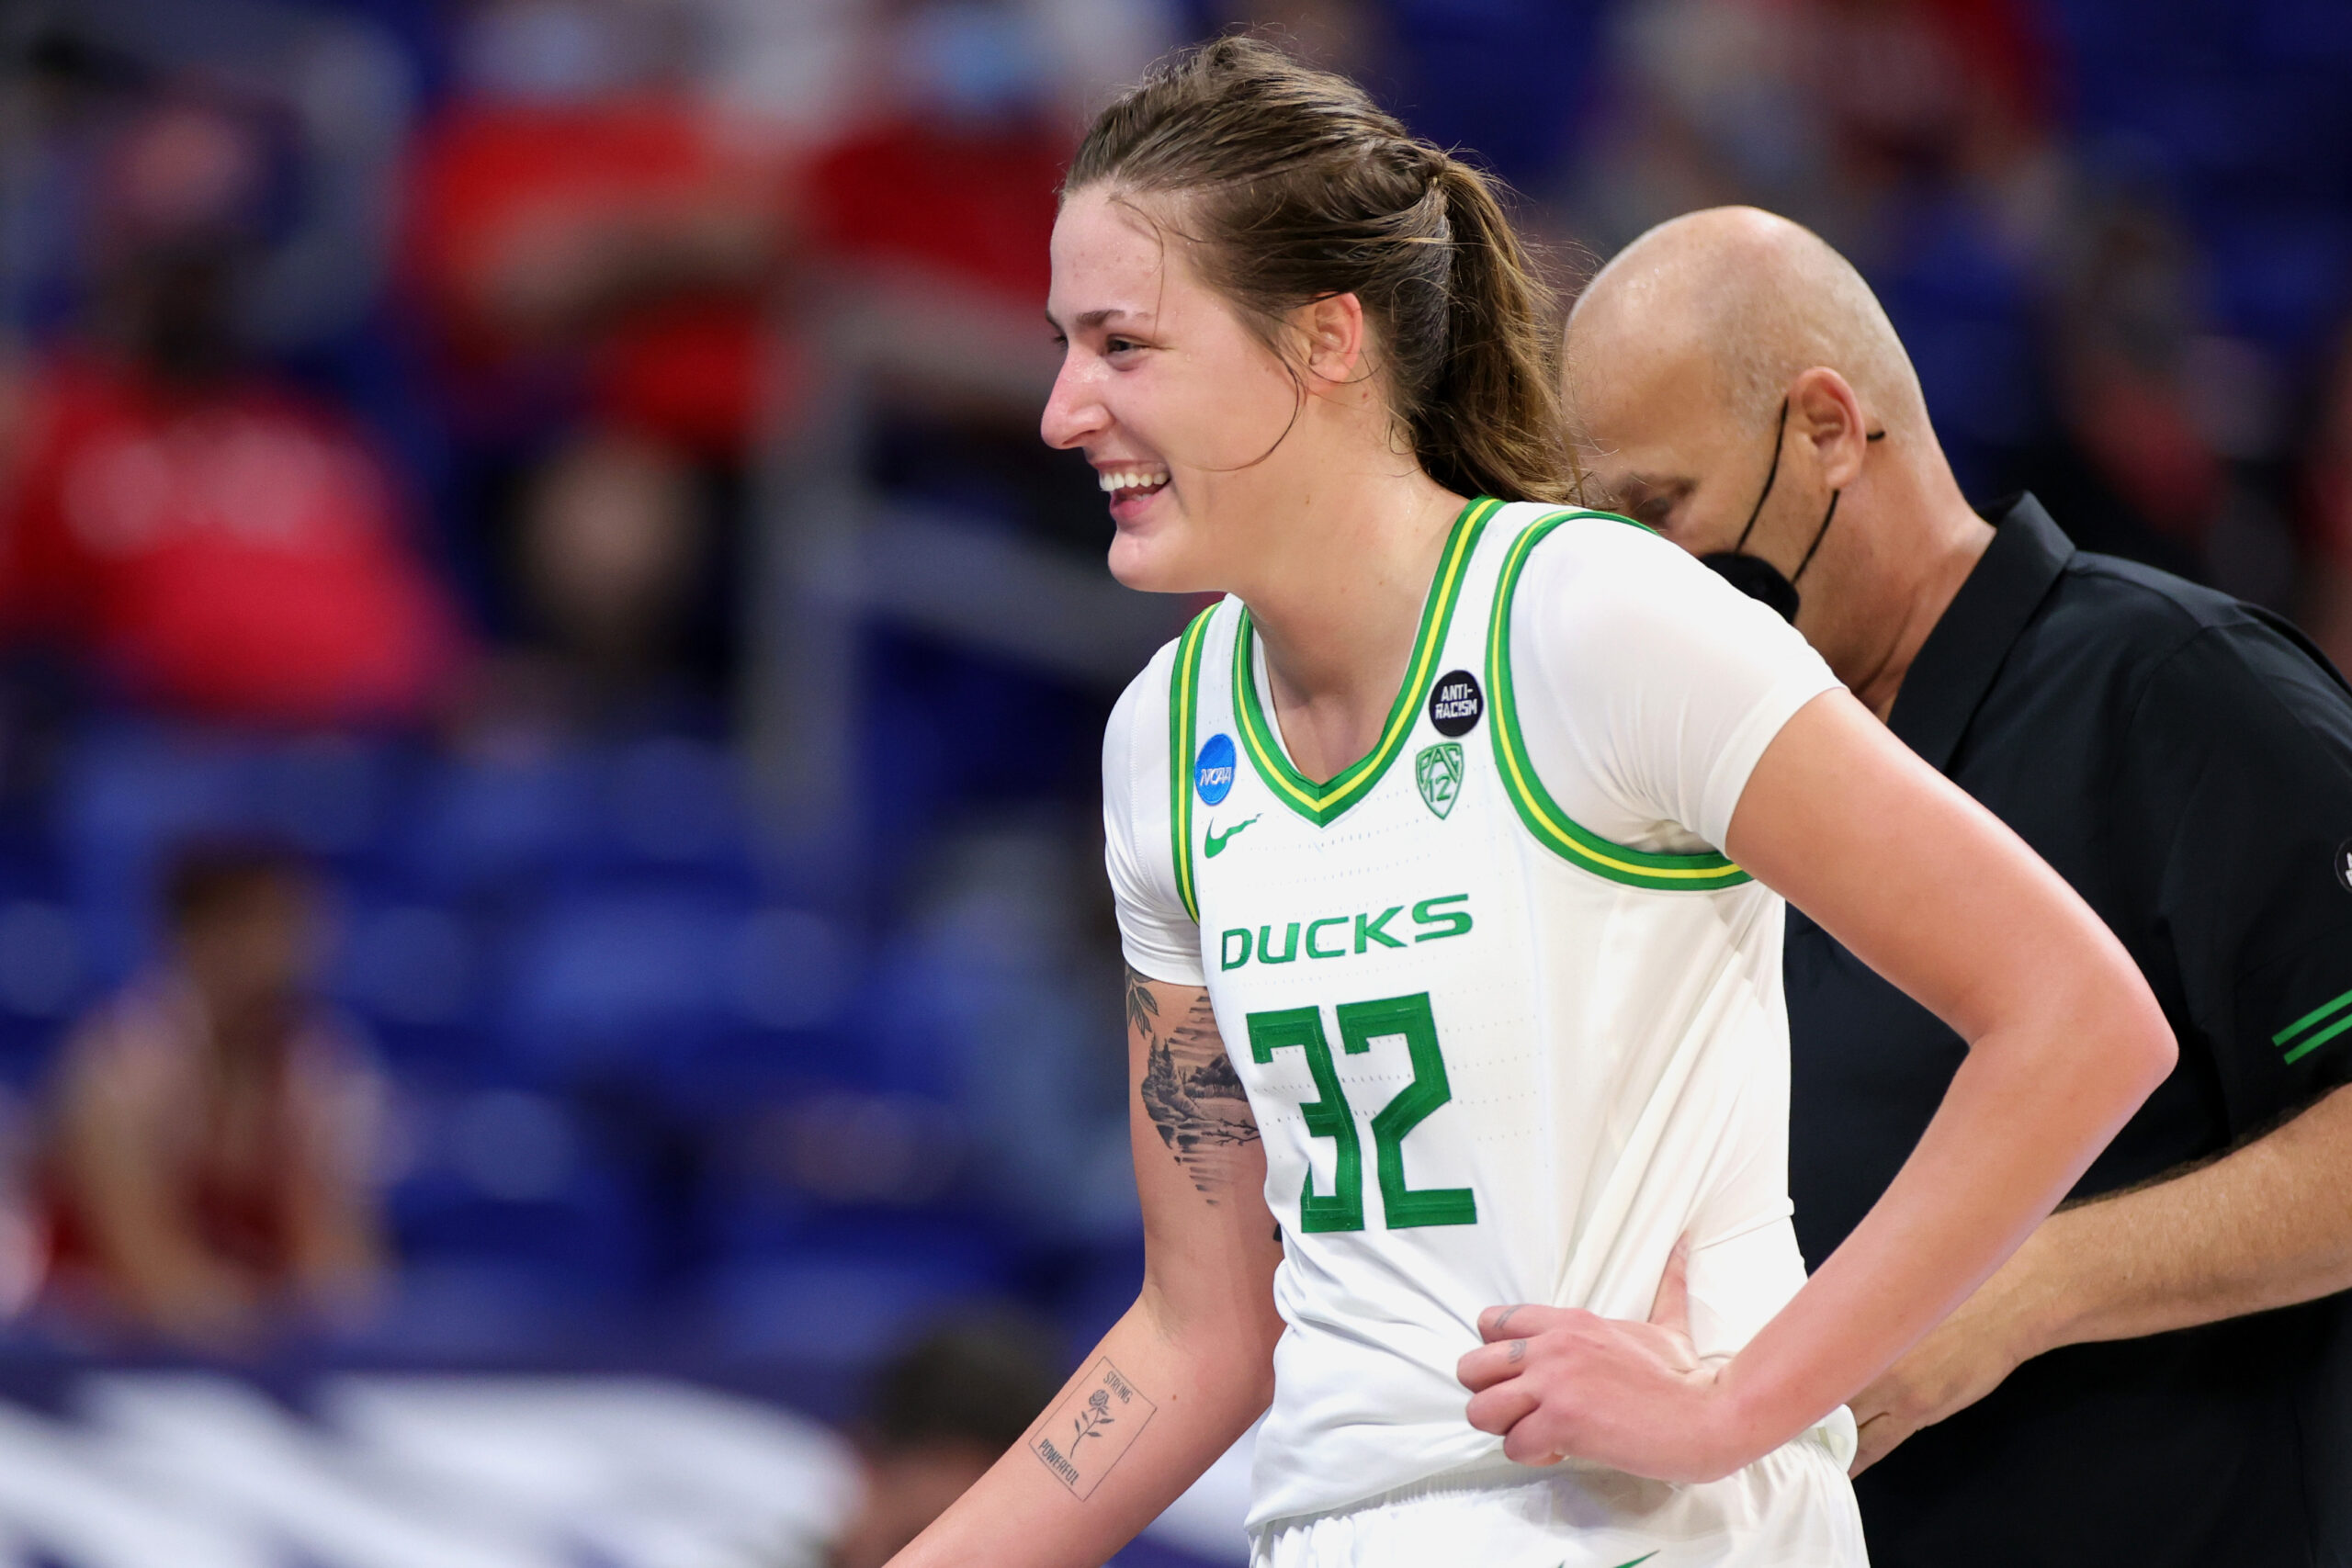 Report: Sedona Prince enters transfer portal and withdraws from WNBA draft